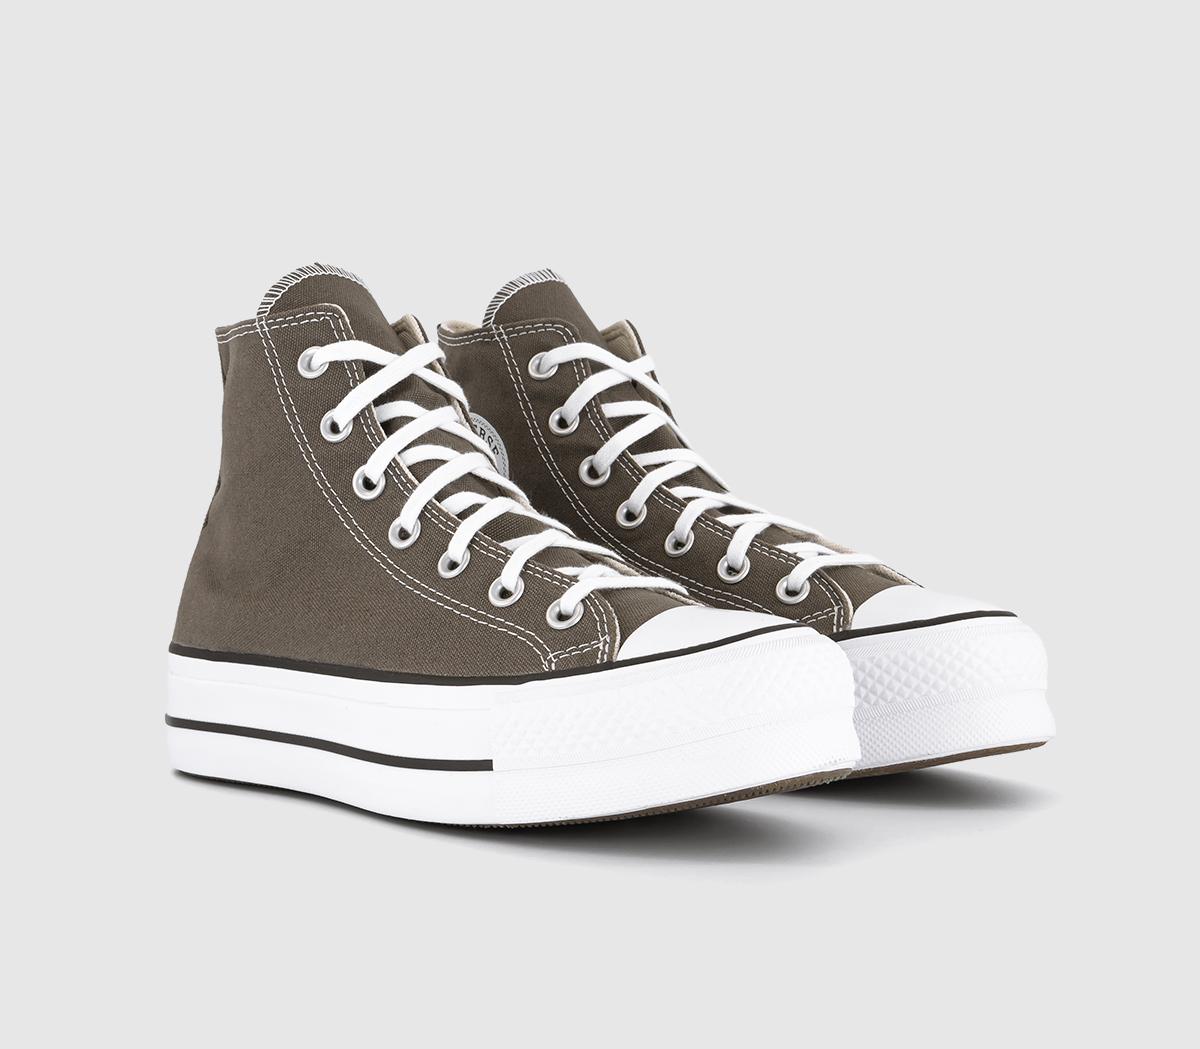 Converse Womens All Star Lift Hi Trainers Charcoal White Black, 6.5